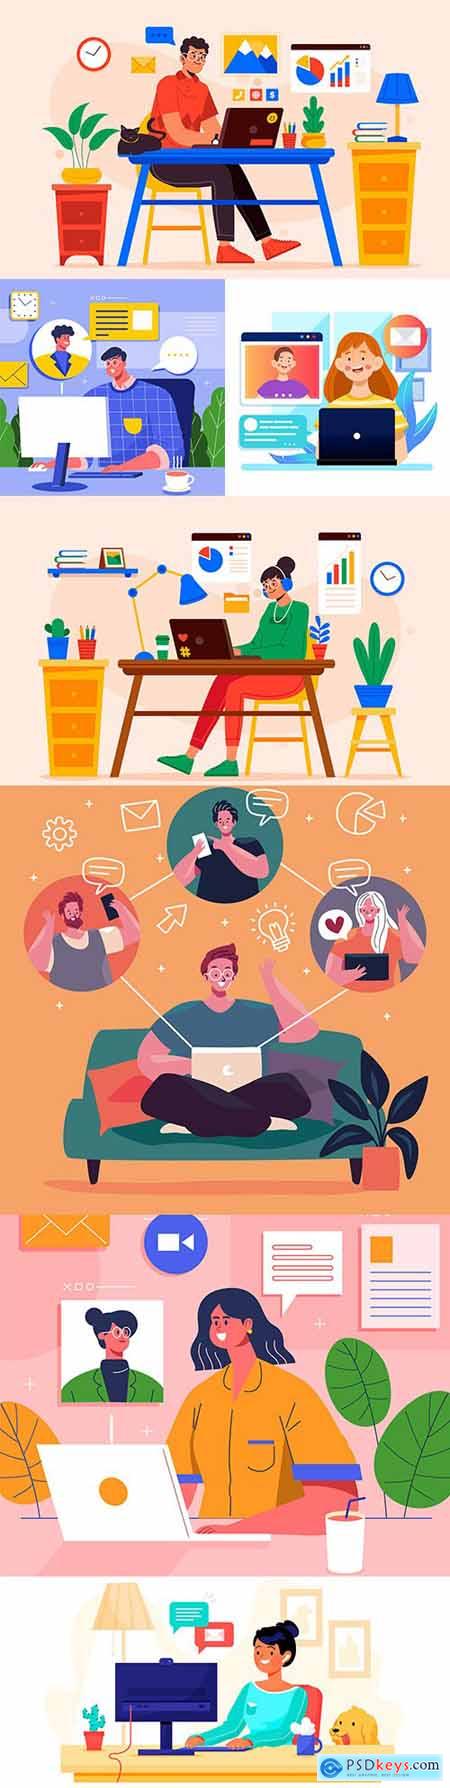 Remote work at home with self-isolation concept illustration